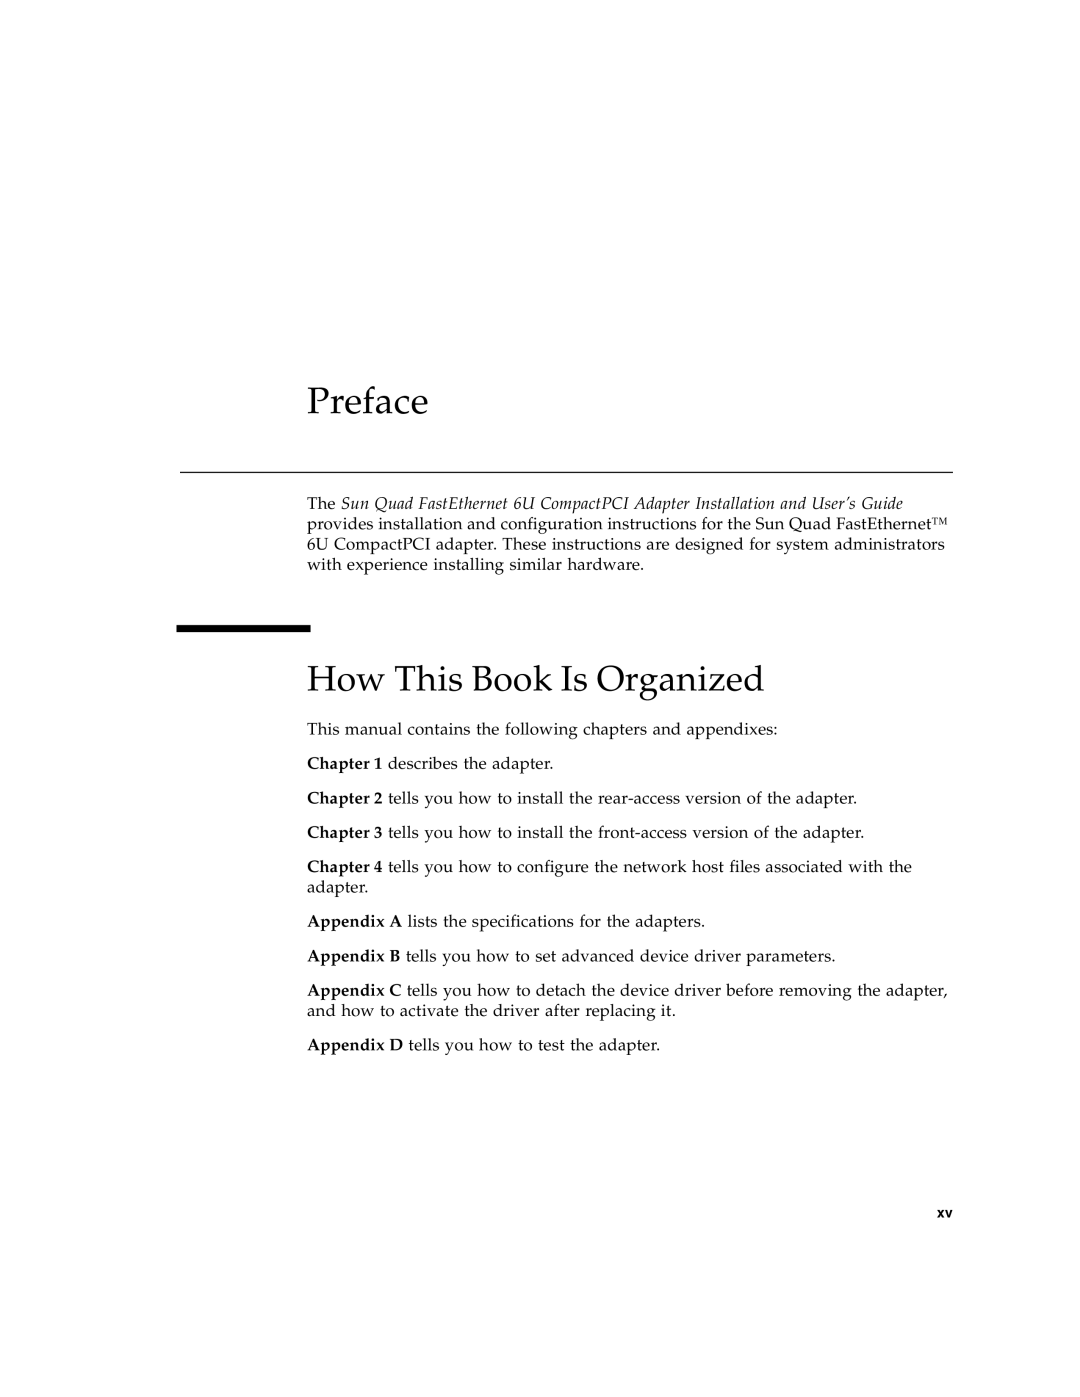 Sun Microsystems 6U manual Preface, How This Book Is Organized 